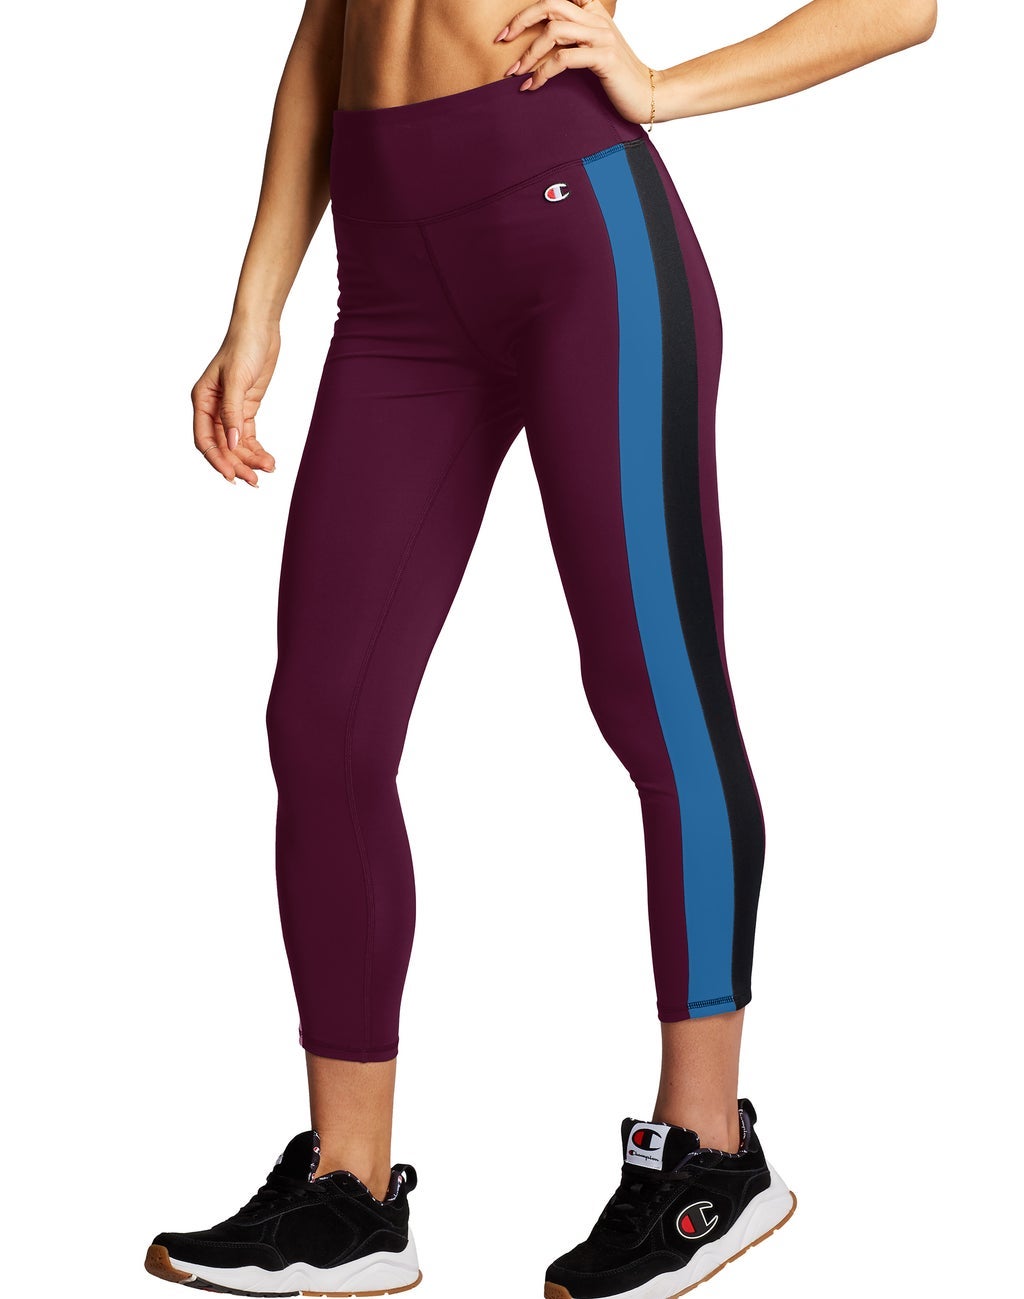 Champion Leggings Outfitters  International Society of Precision